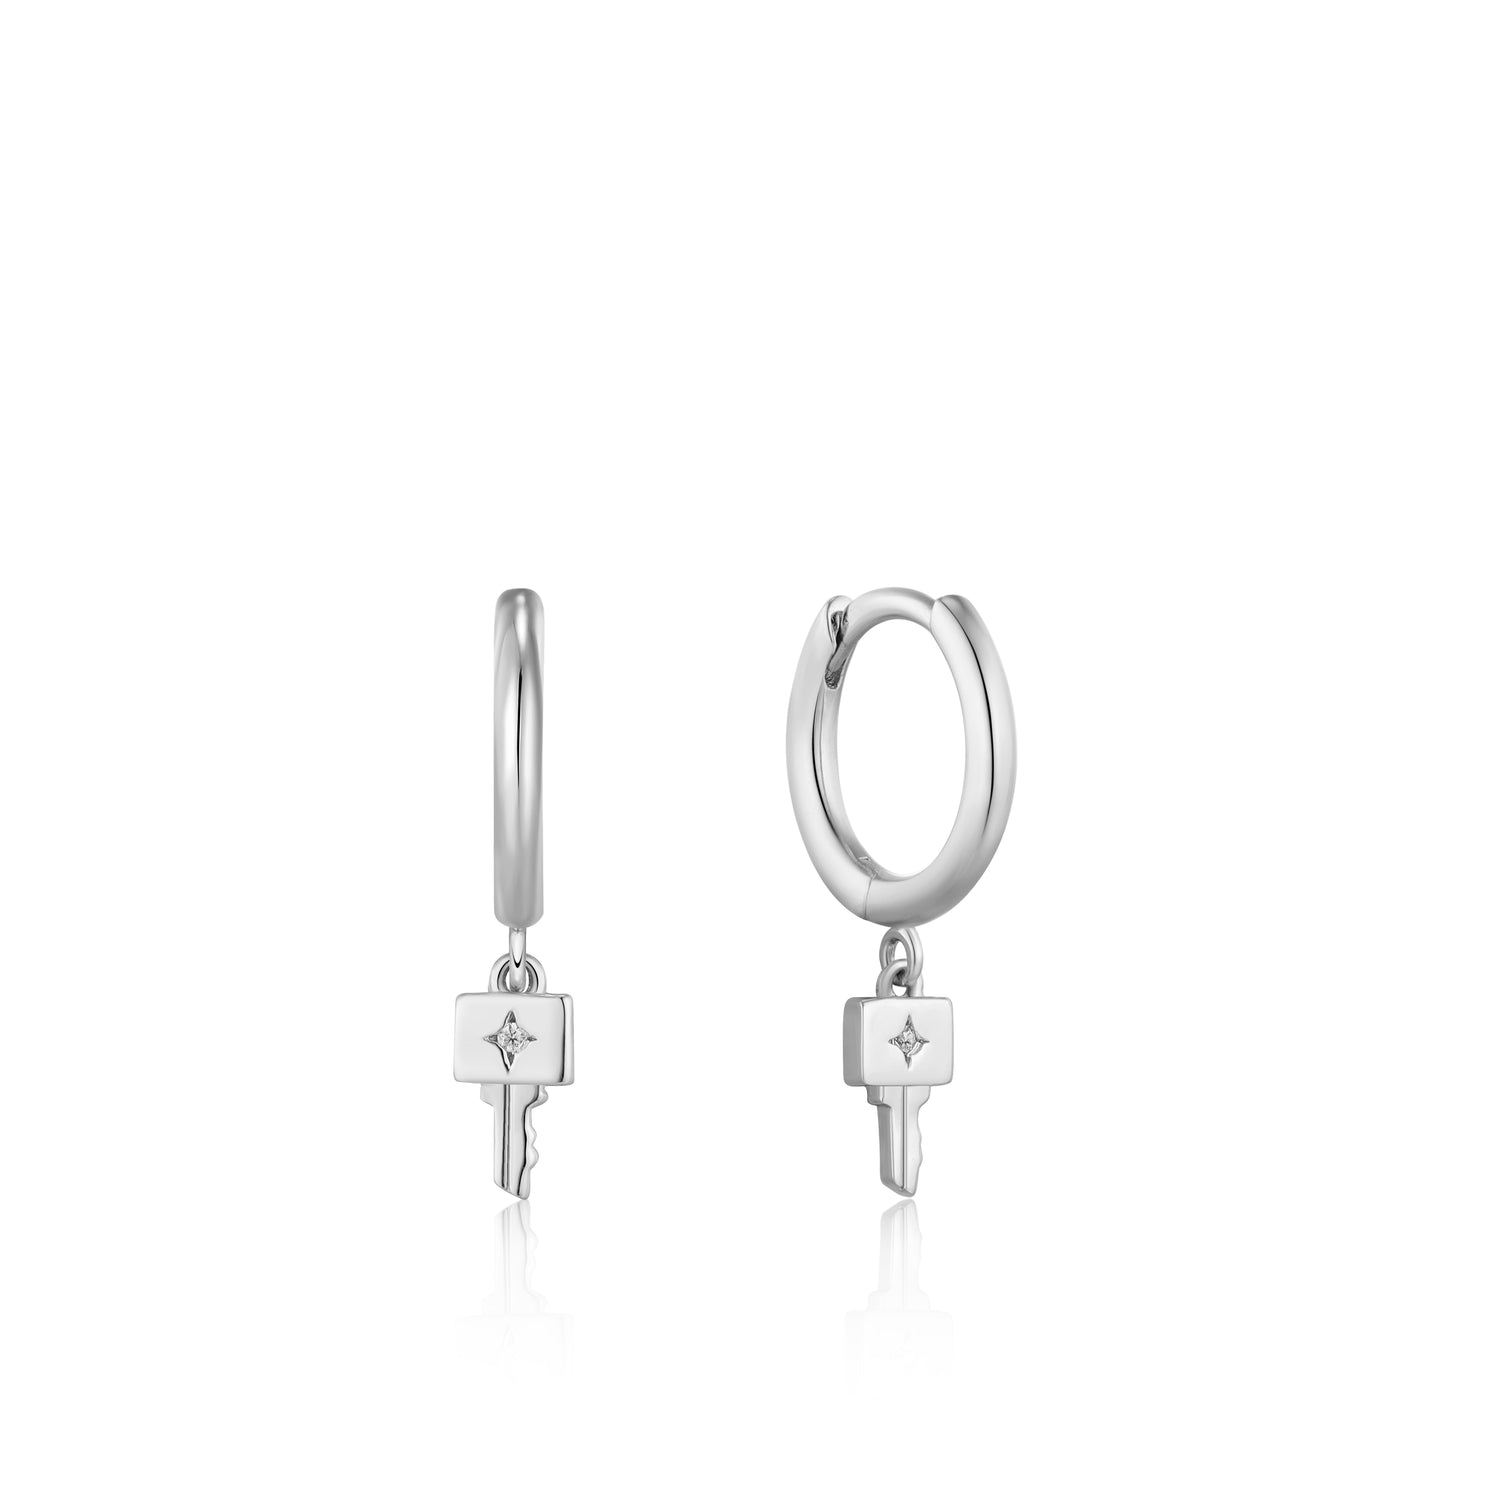 ANIA HAIE ANIA HAIE - Silver Key Huggie Hoop Earrings available at The Good Life Boutique